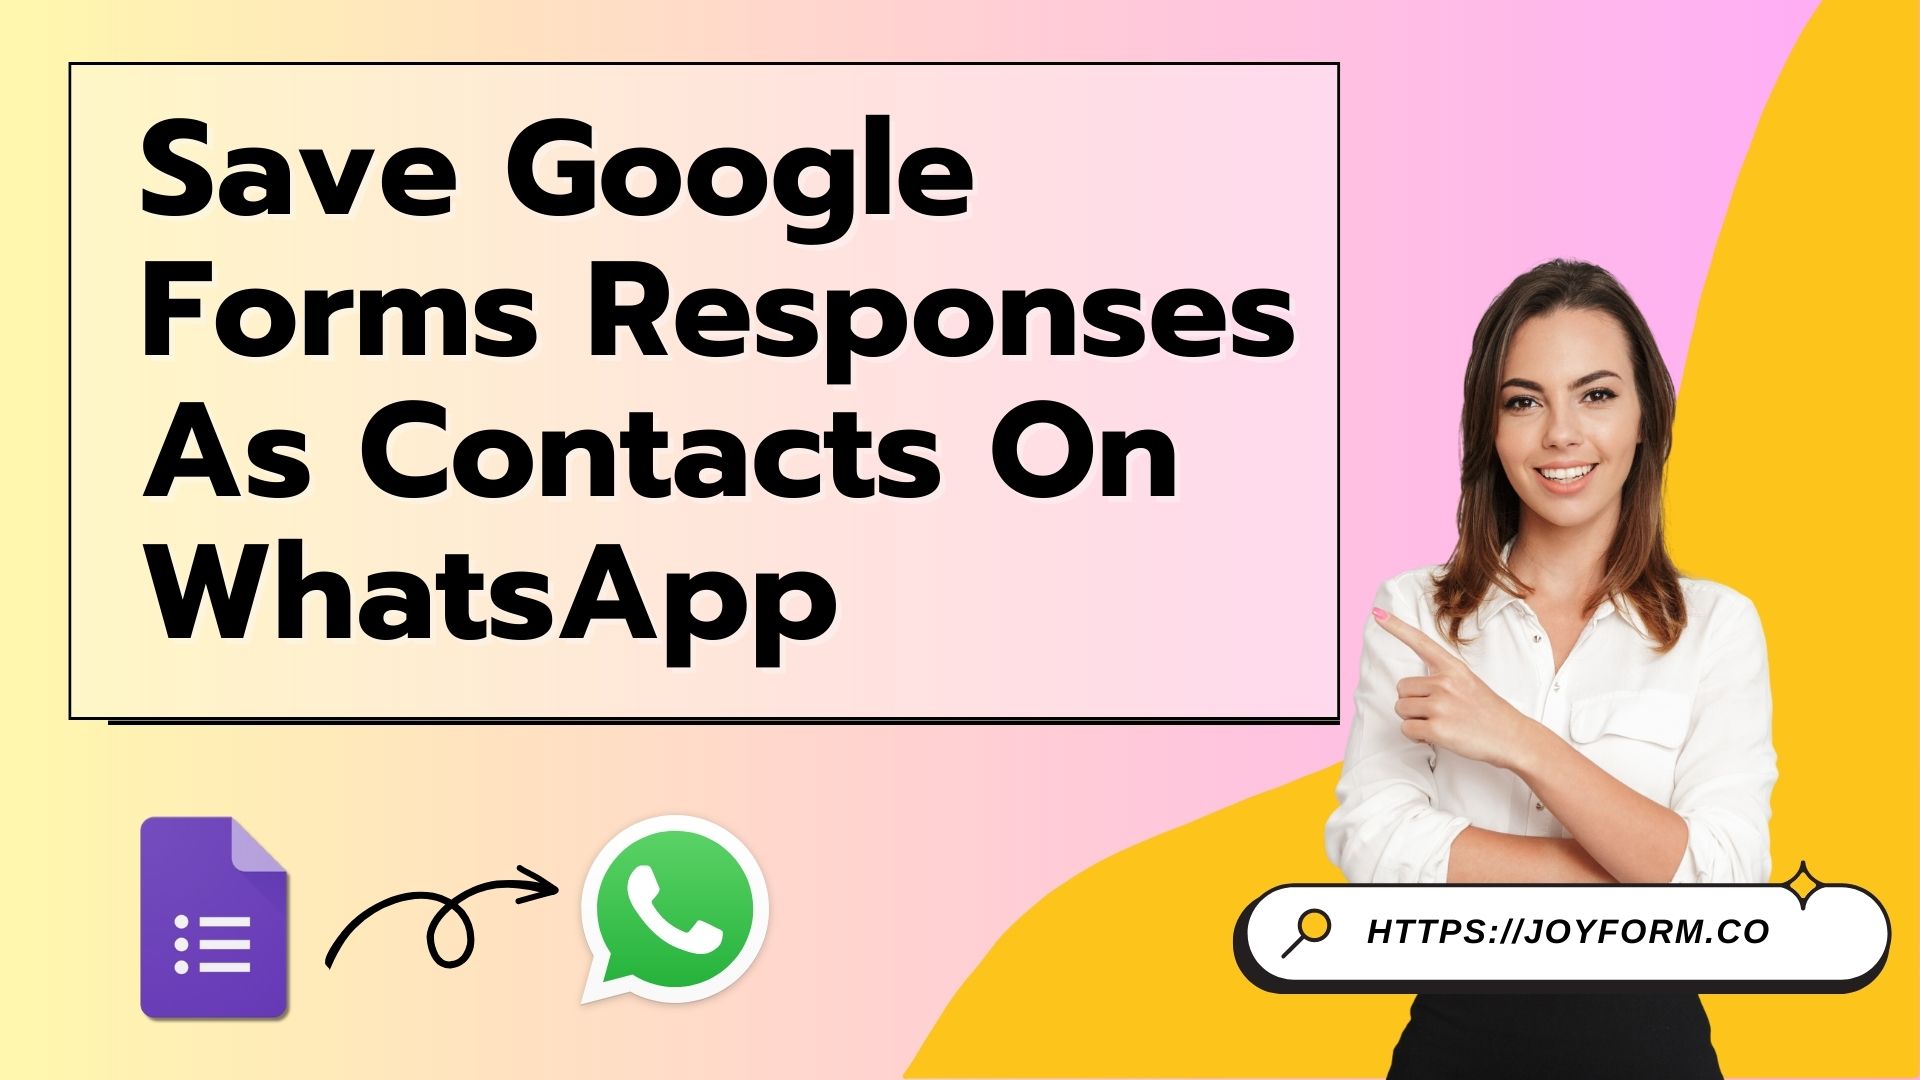 Save Contacts of Google Forms Responses in WhatsApp